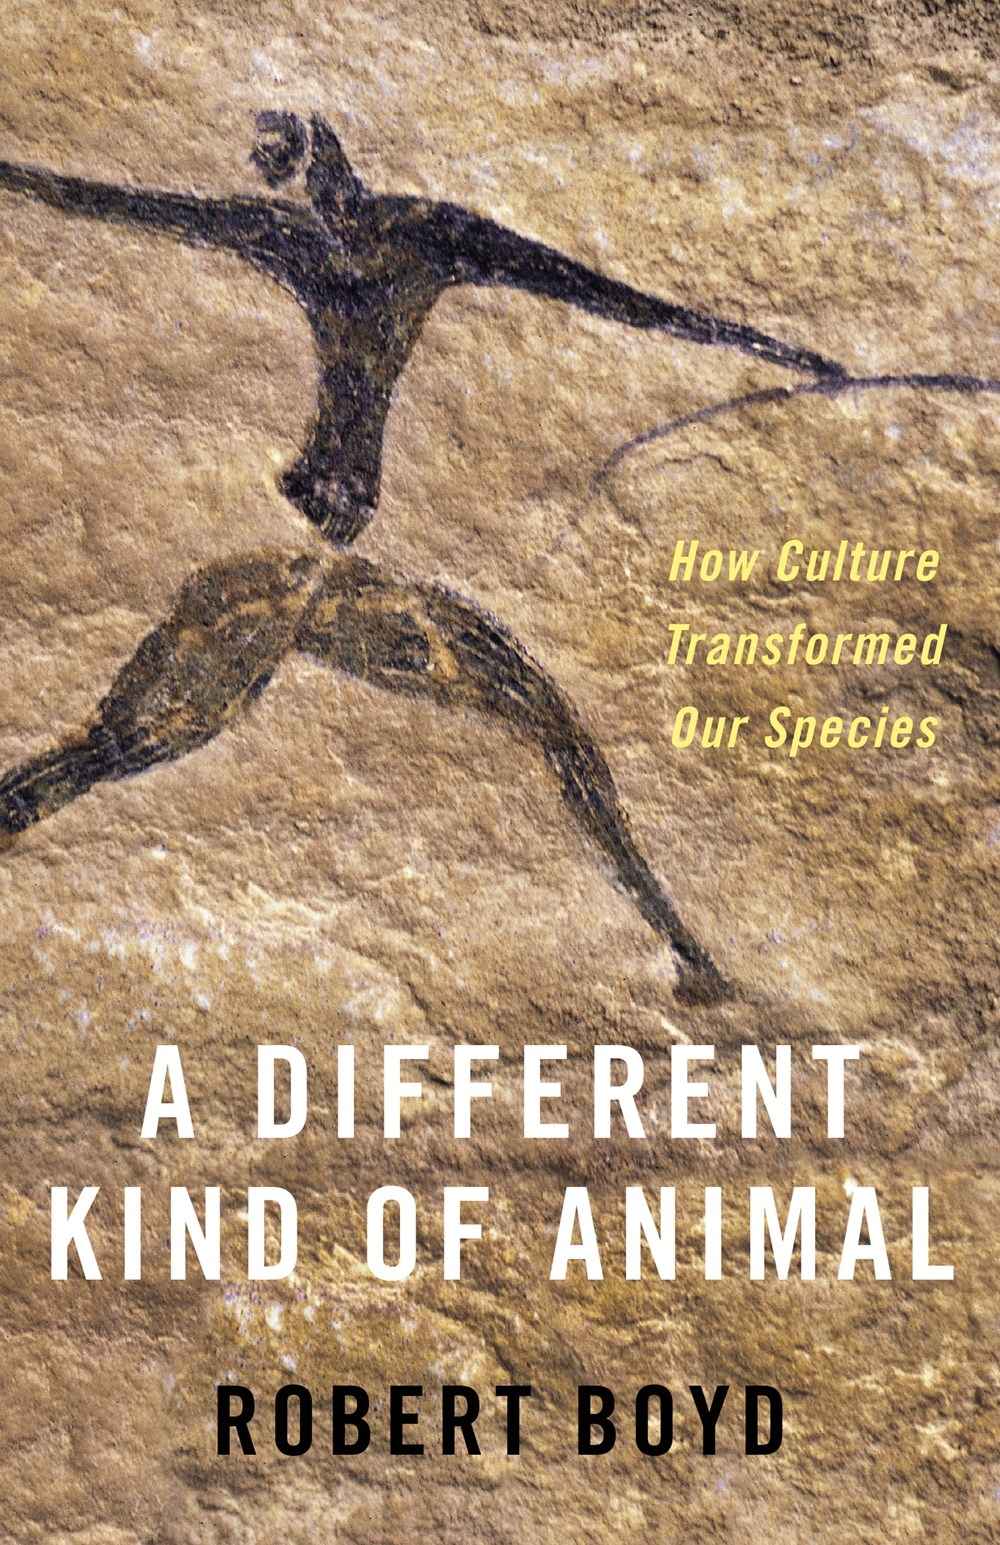 A Different Kind of Animal: How Culture Transformed Our Species